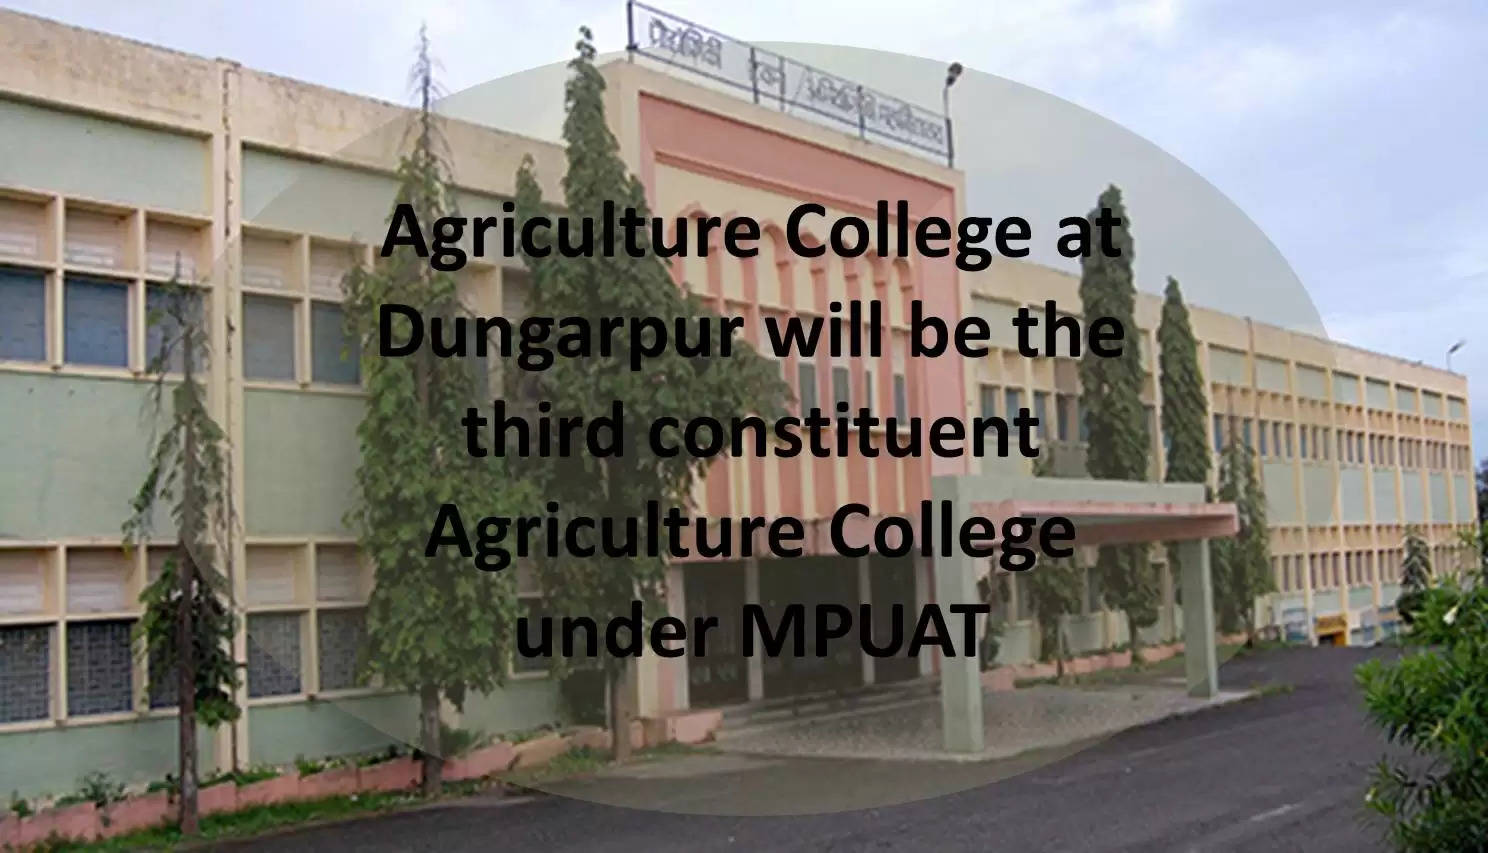 Agriculture College Dungarpur New Agriculture College under MPUAT inauguration by Kalraj Mishra Tribal Belt Education in Tribal Belt update from Udaipur